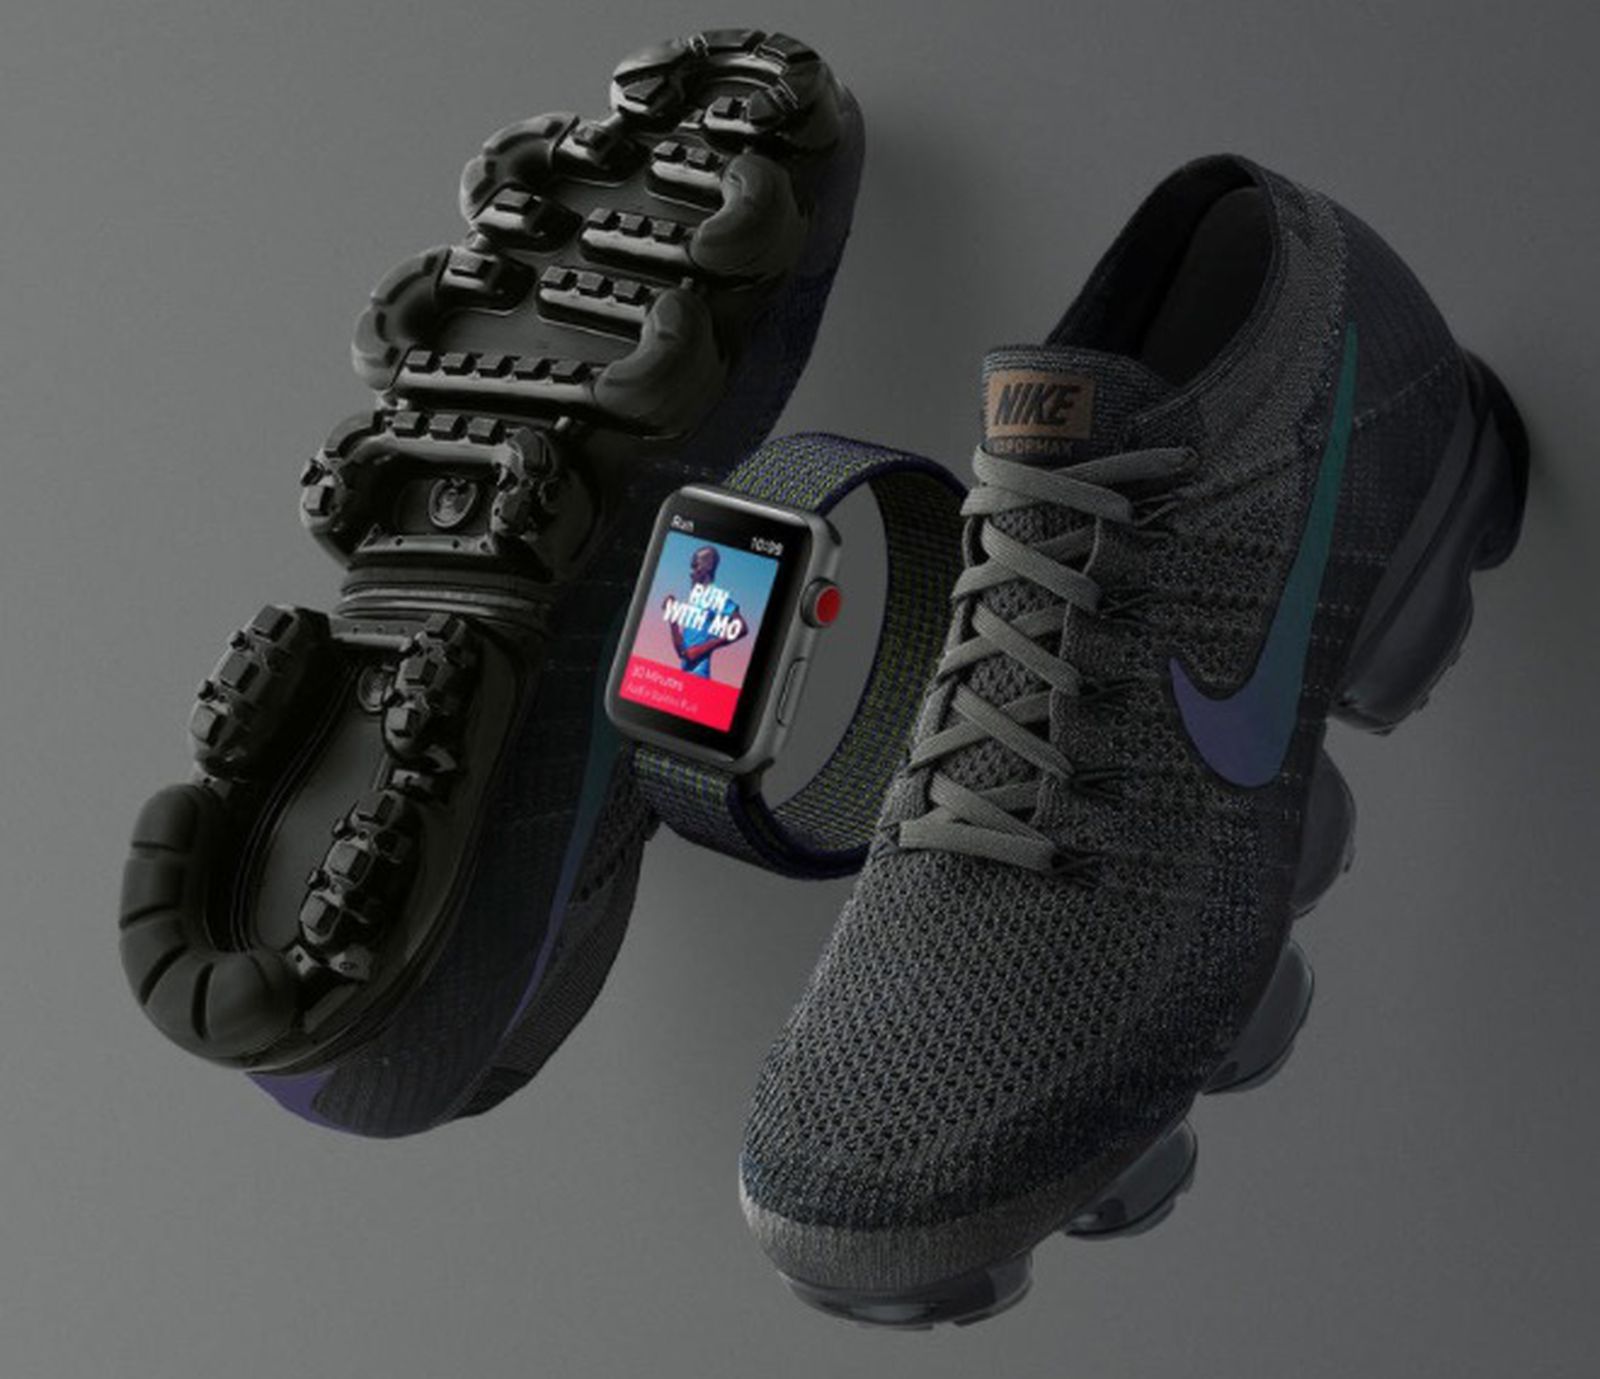 Apple Watch Nike Series 3 Available With New Midnight Fog Band Starting November 24 Updated Macrumors